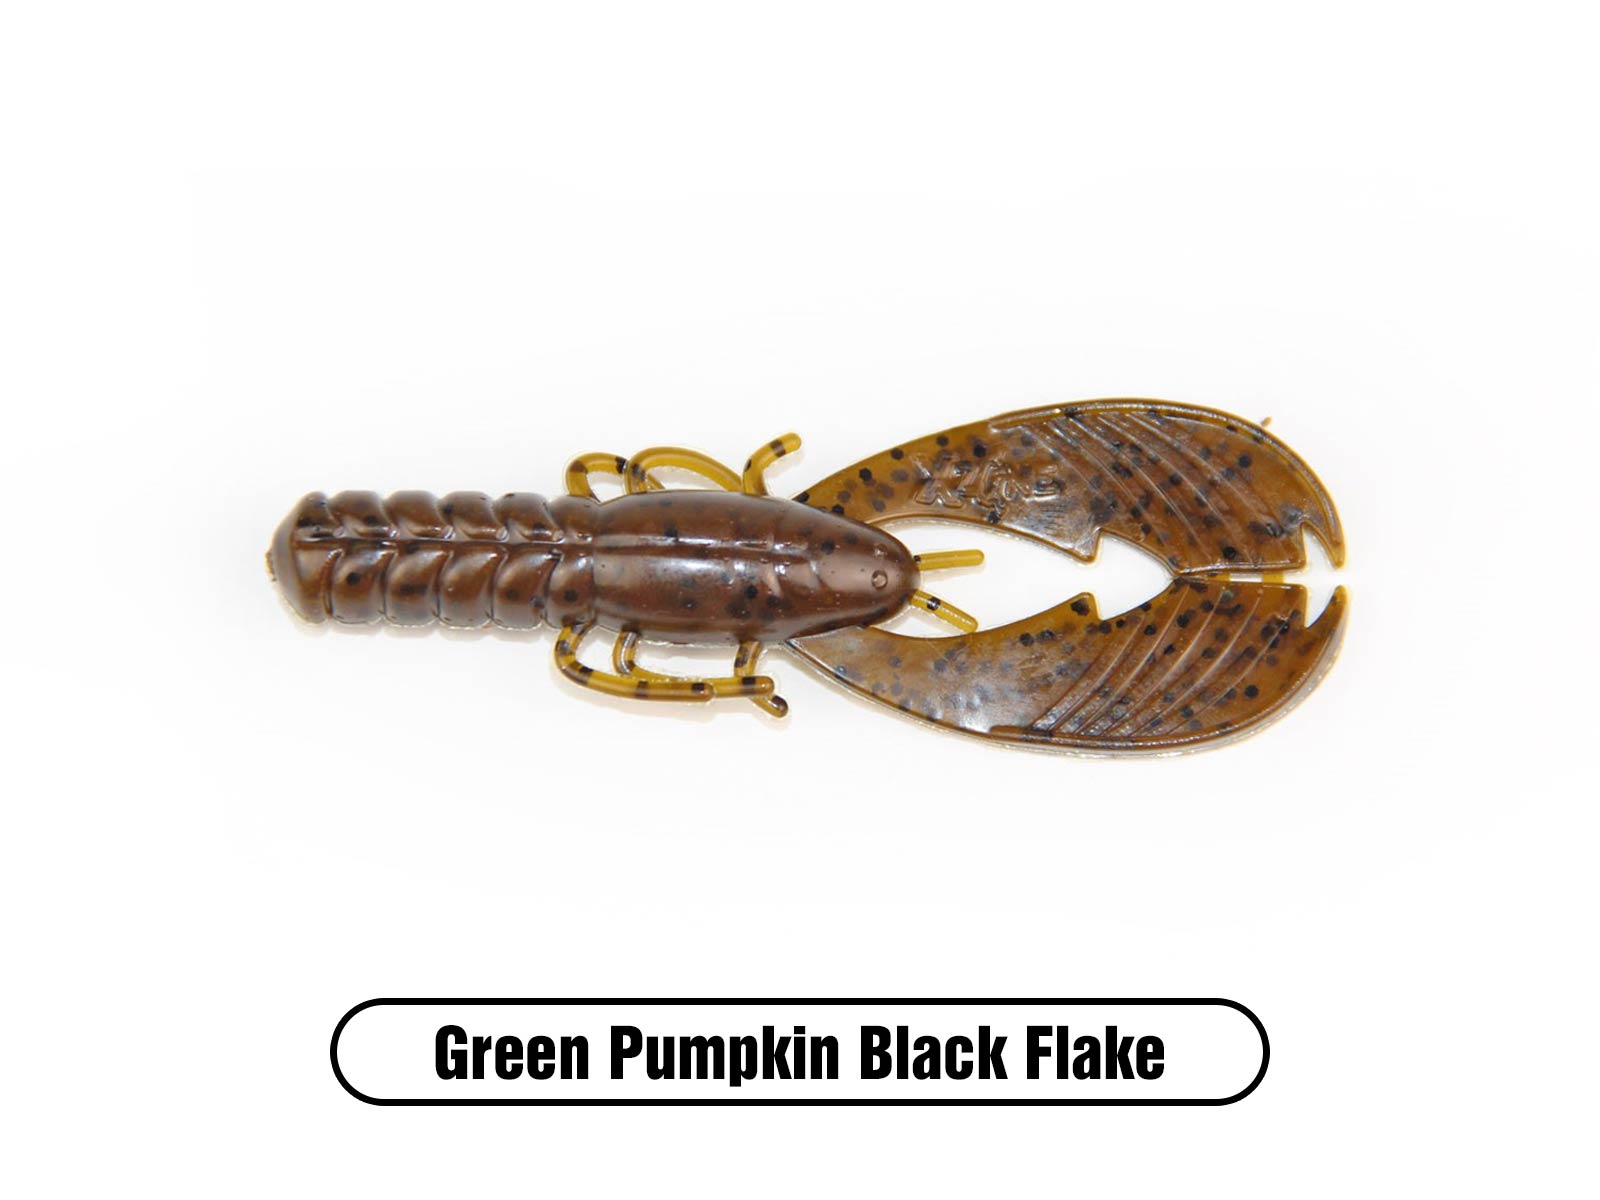 Muscle Back Craw 4